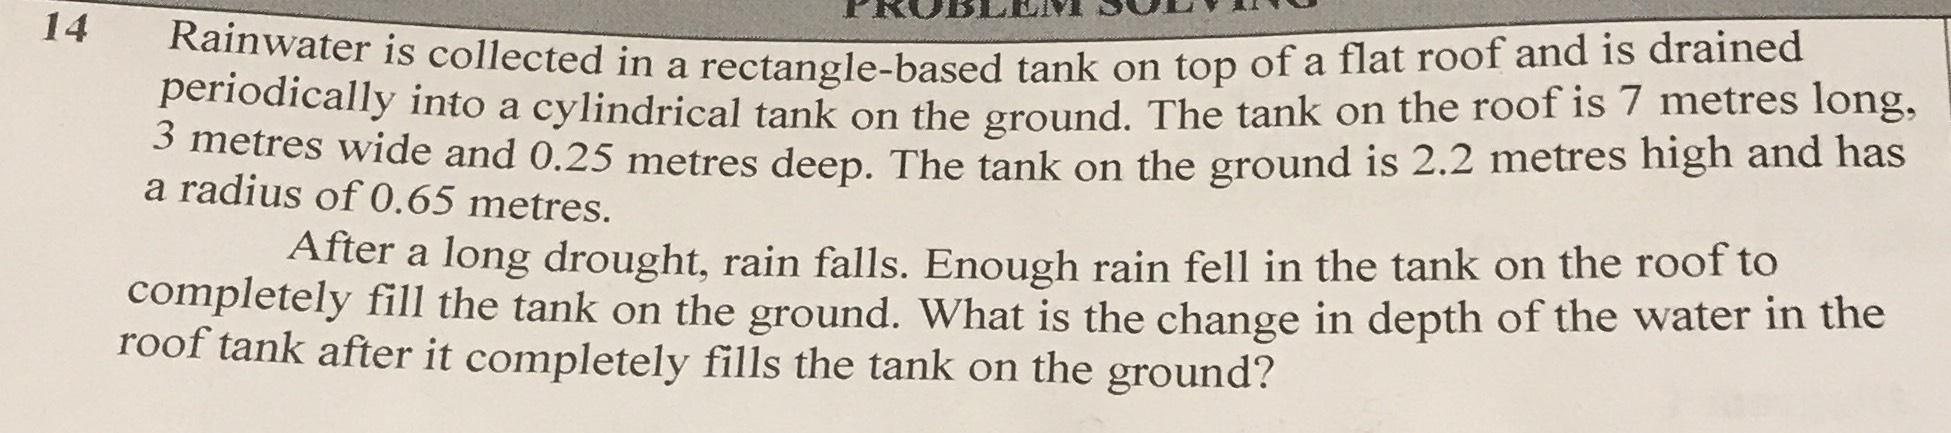 14 Rainwater is collected in a rectangle-based tan...